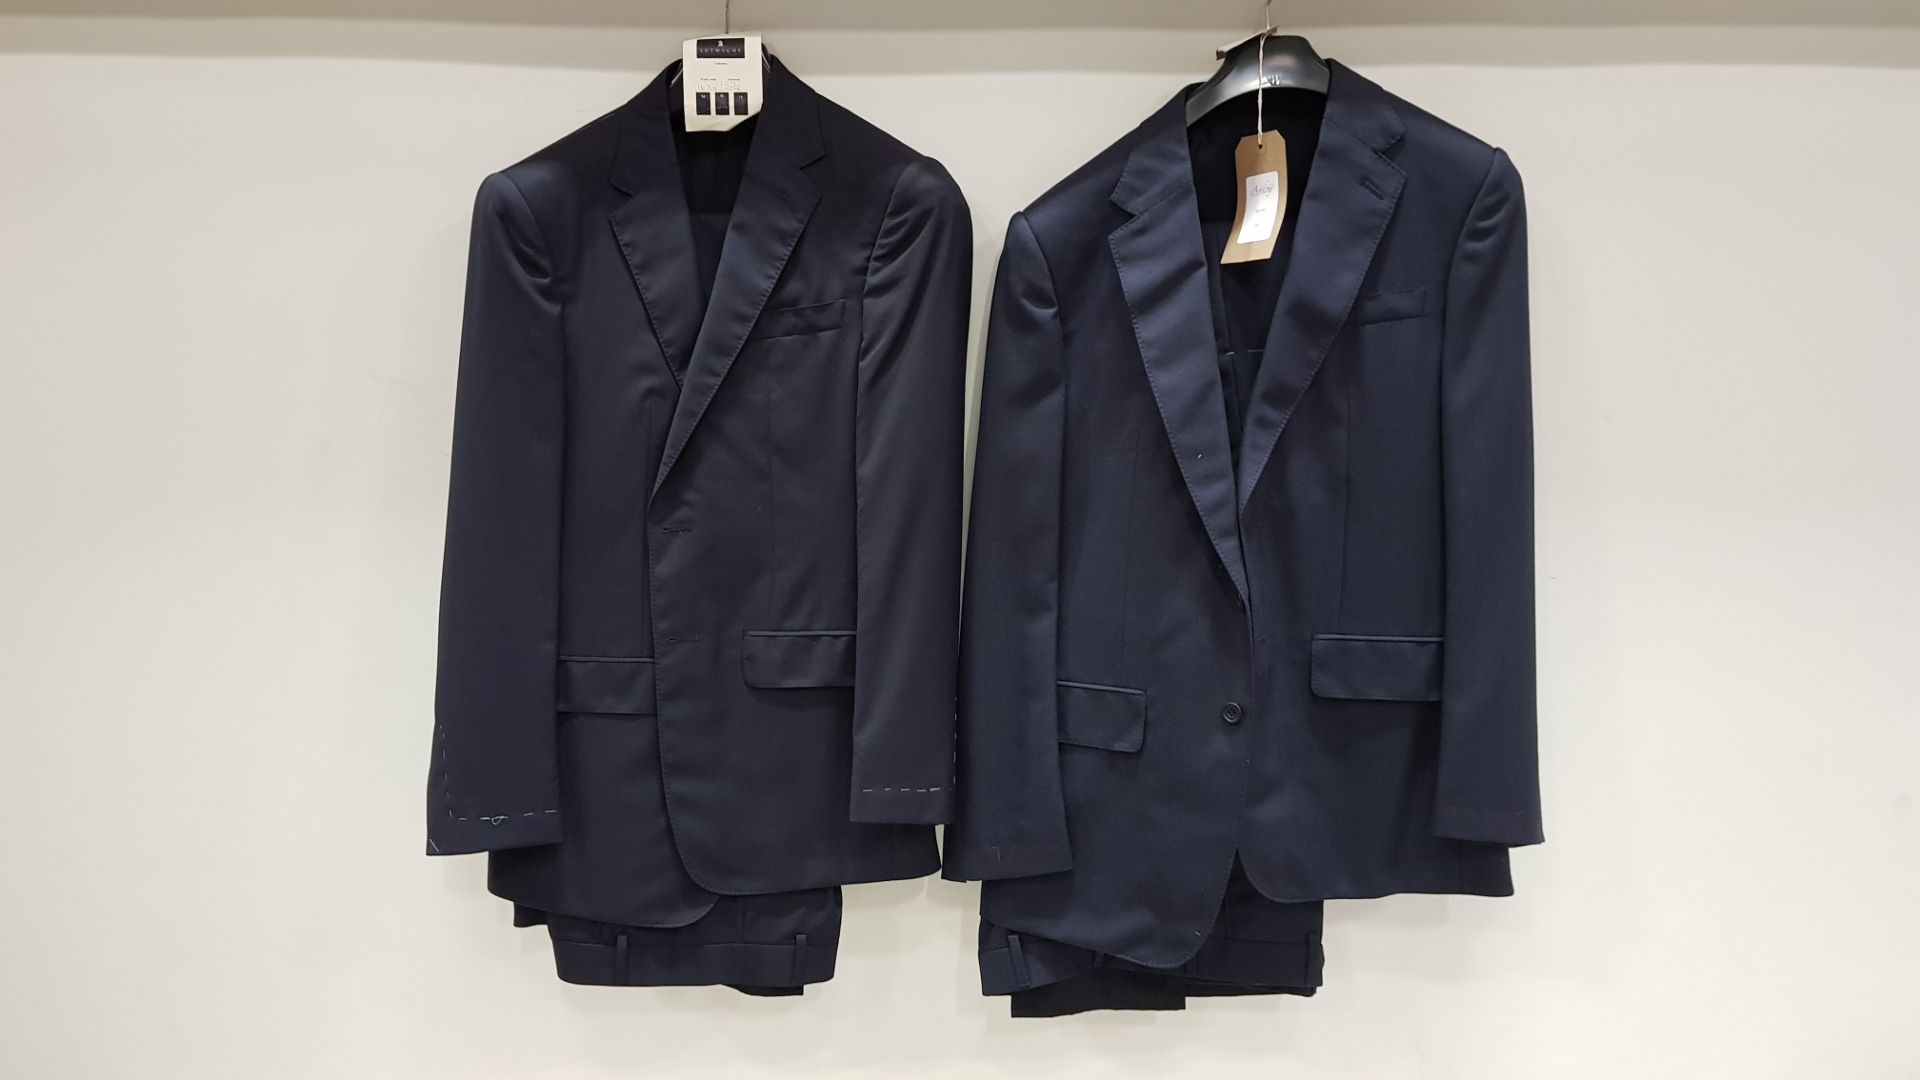 5 X BRAND NEW LUTWYCHE NAVY TAILORED SUITS SIZES 44R, 40R, 50R, 38R, 42R (PLEASE NOTE SUITS NOT